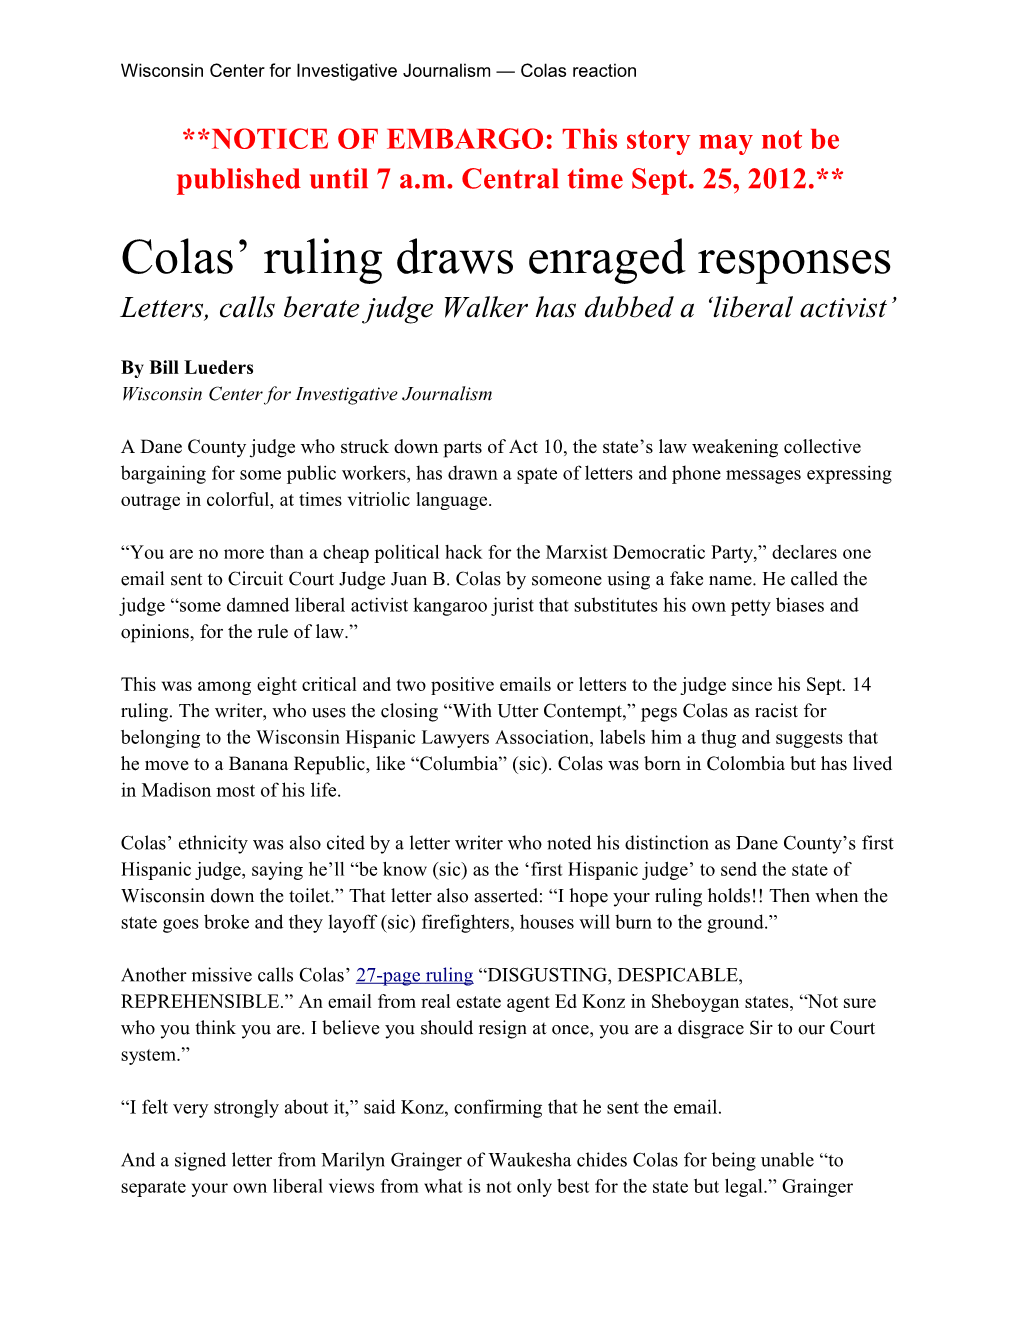 Wisconsin Center for Investigative Journalism Colas Reaction